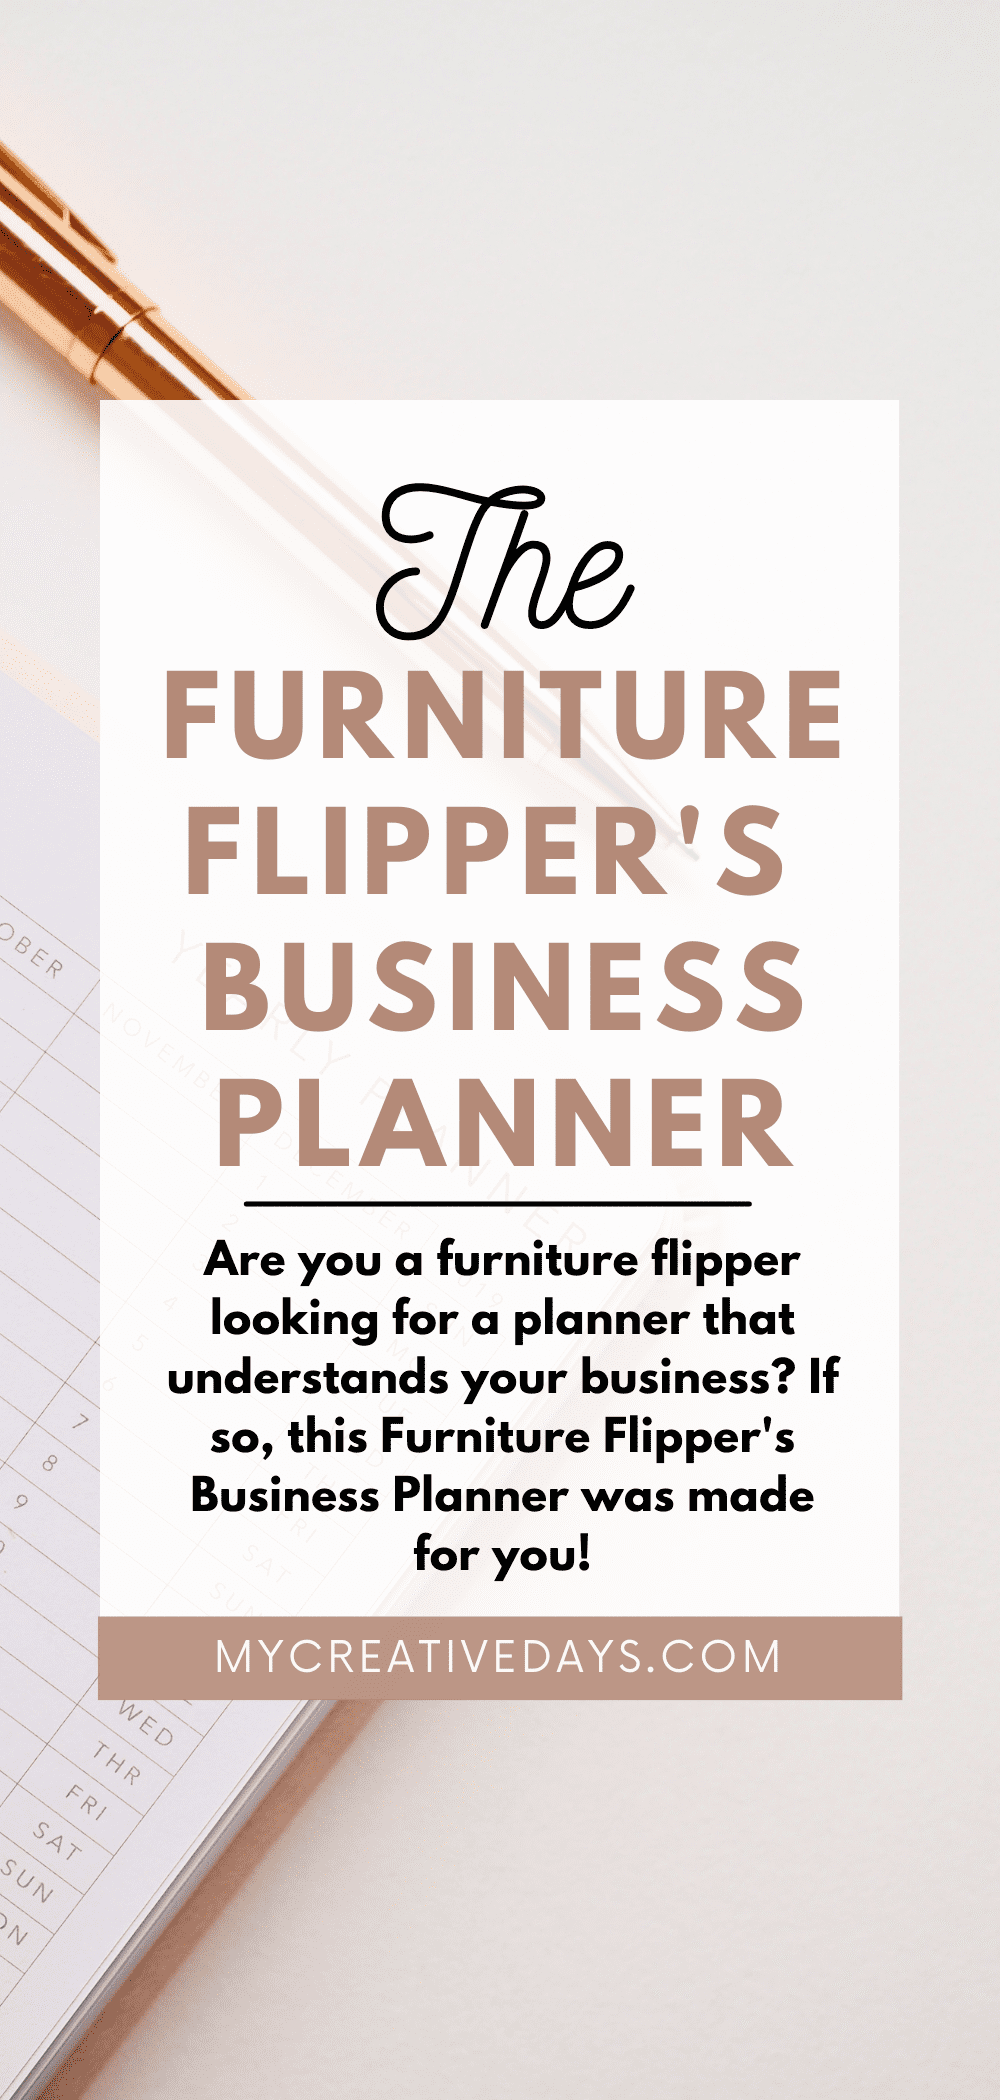 Are you a furniture flipper looking for a planner that understands your business? If so, this Furniture Flipper's Business Planner was made for you.